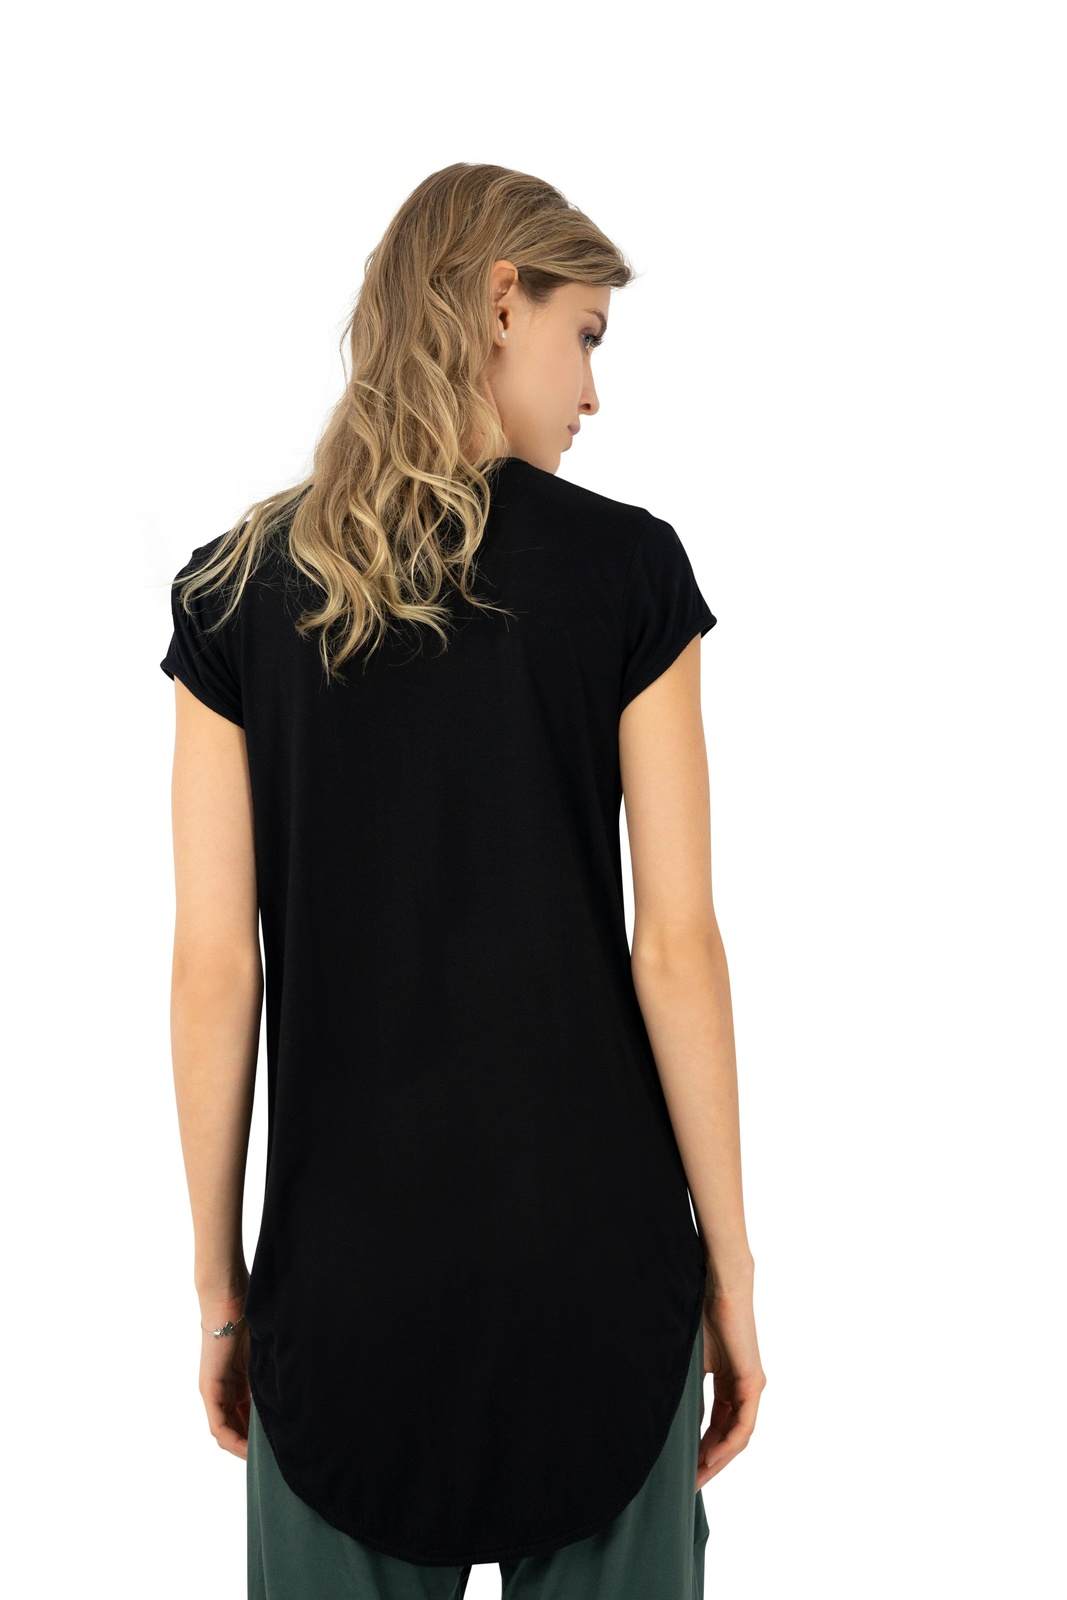 Womens Black Modal Sustainable t shirt for sleep or streetwear by Ekoluxe Ethical Fashion Brand